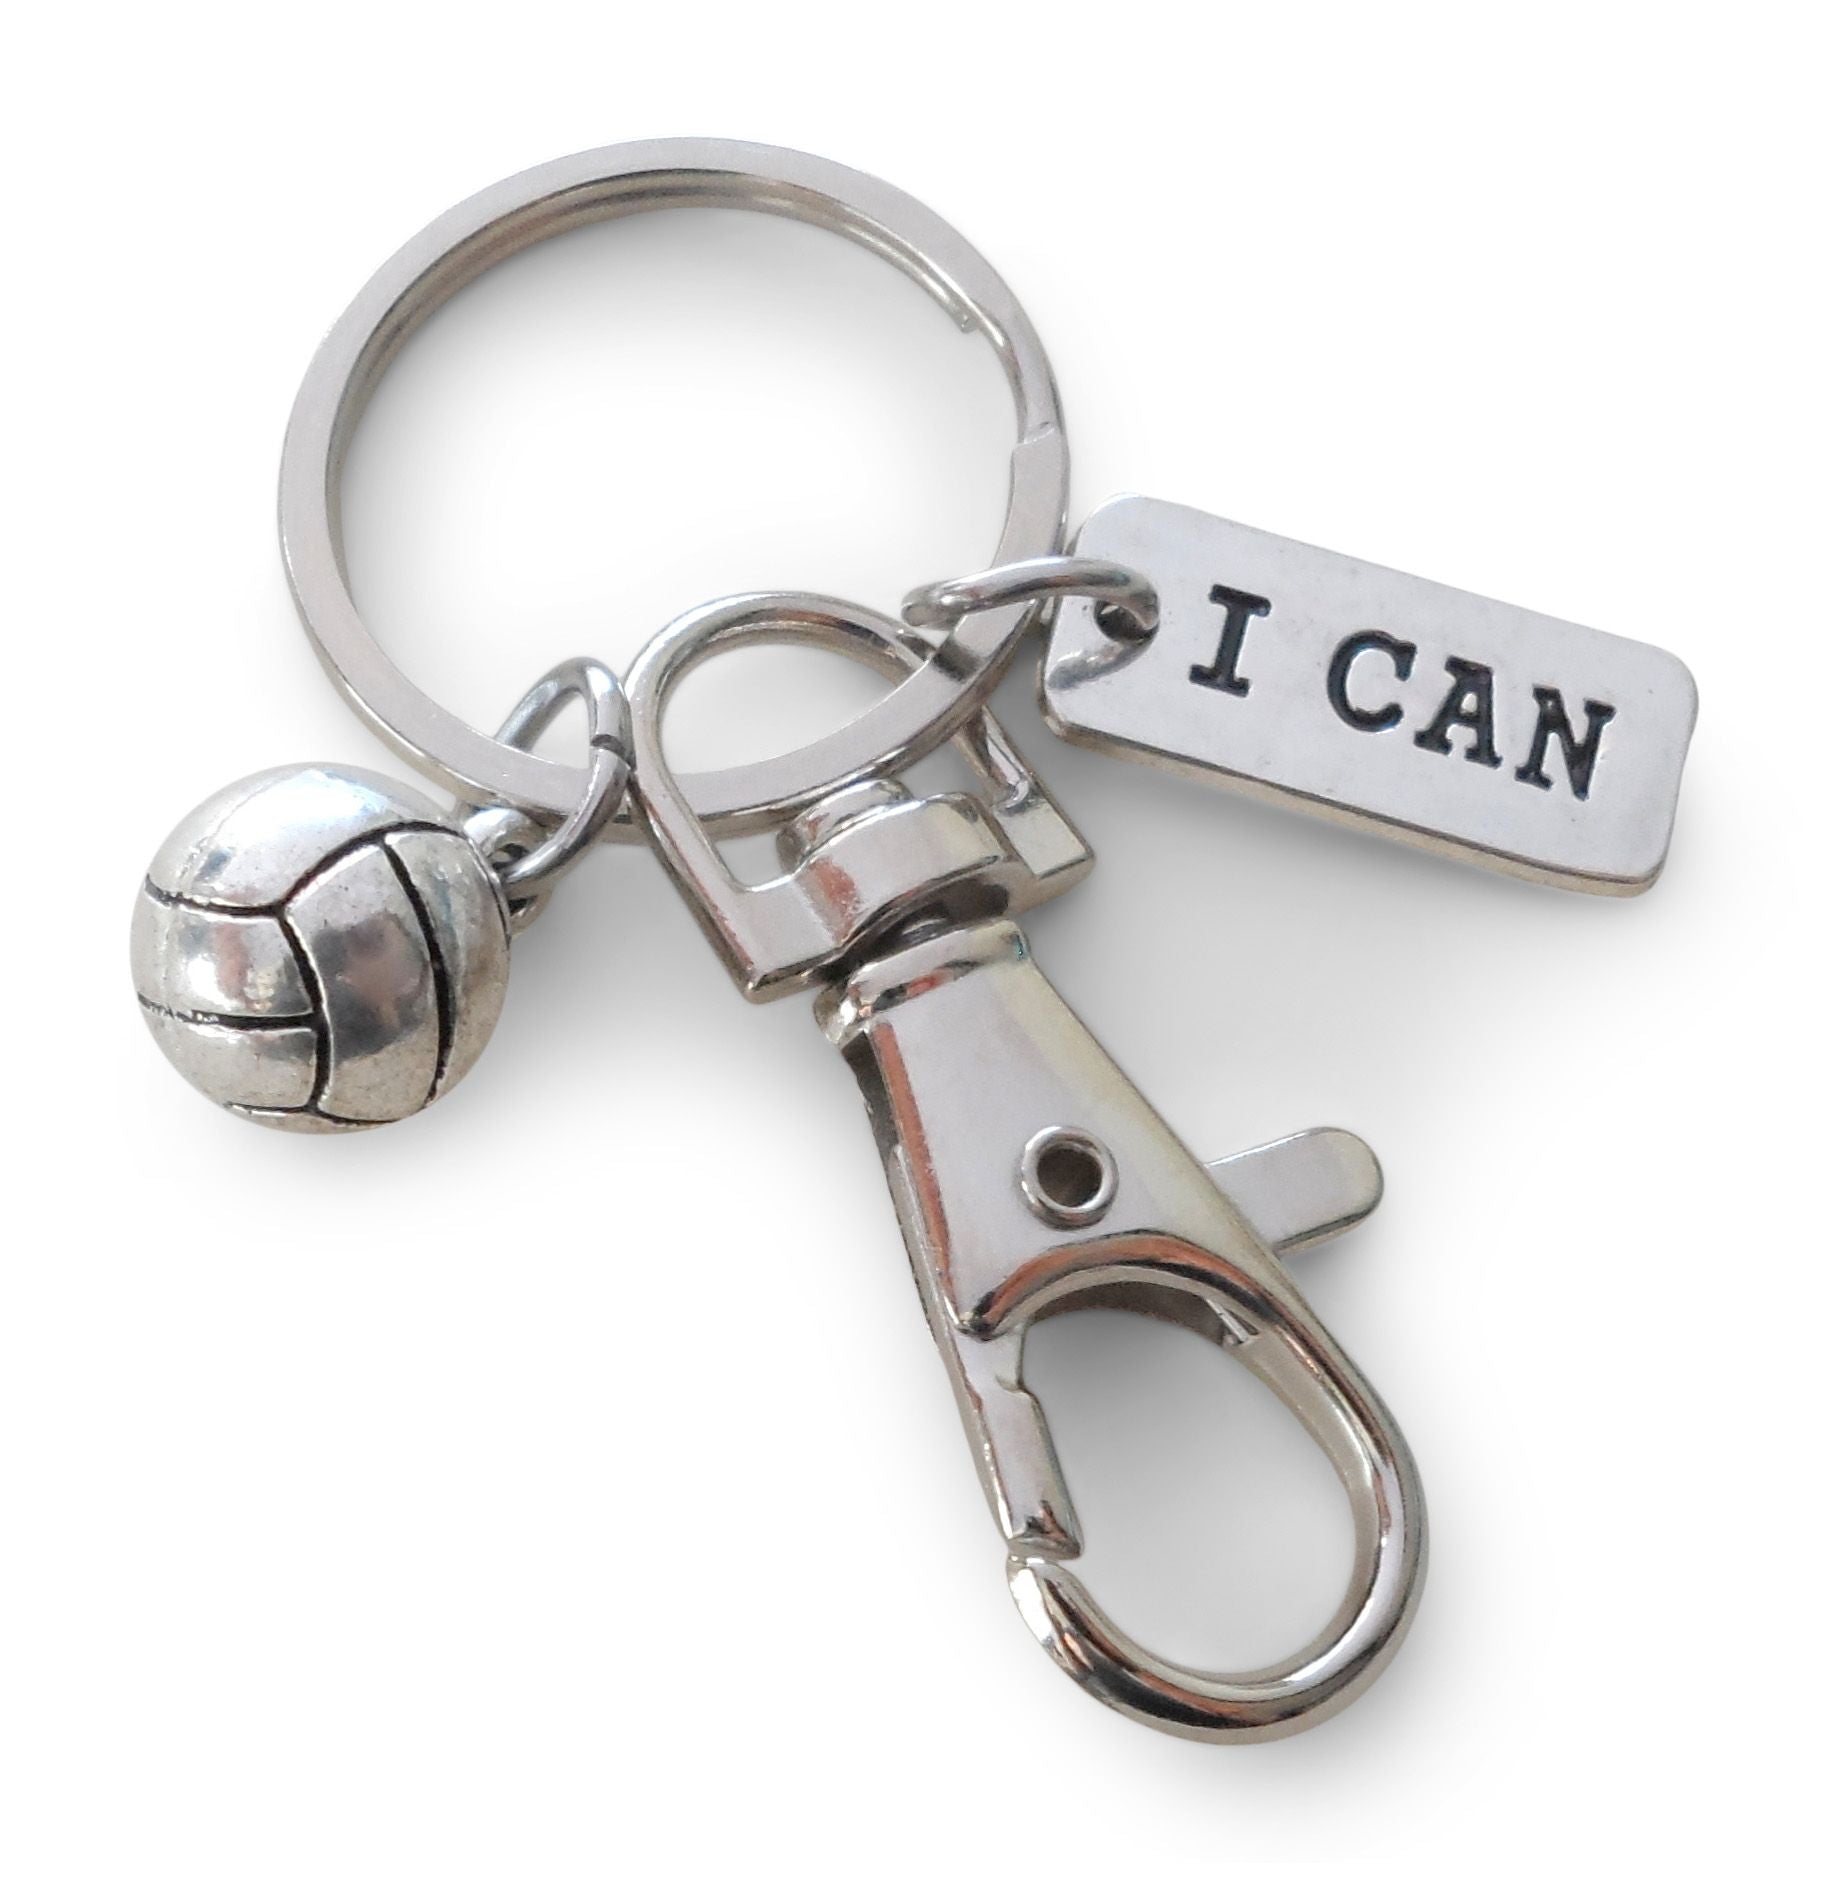 JewelryEveryday Volleyball Keychain with I Can Charm and Swivel Clasp Hook, Volleyball Player or Coach Keychain